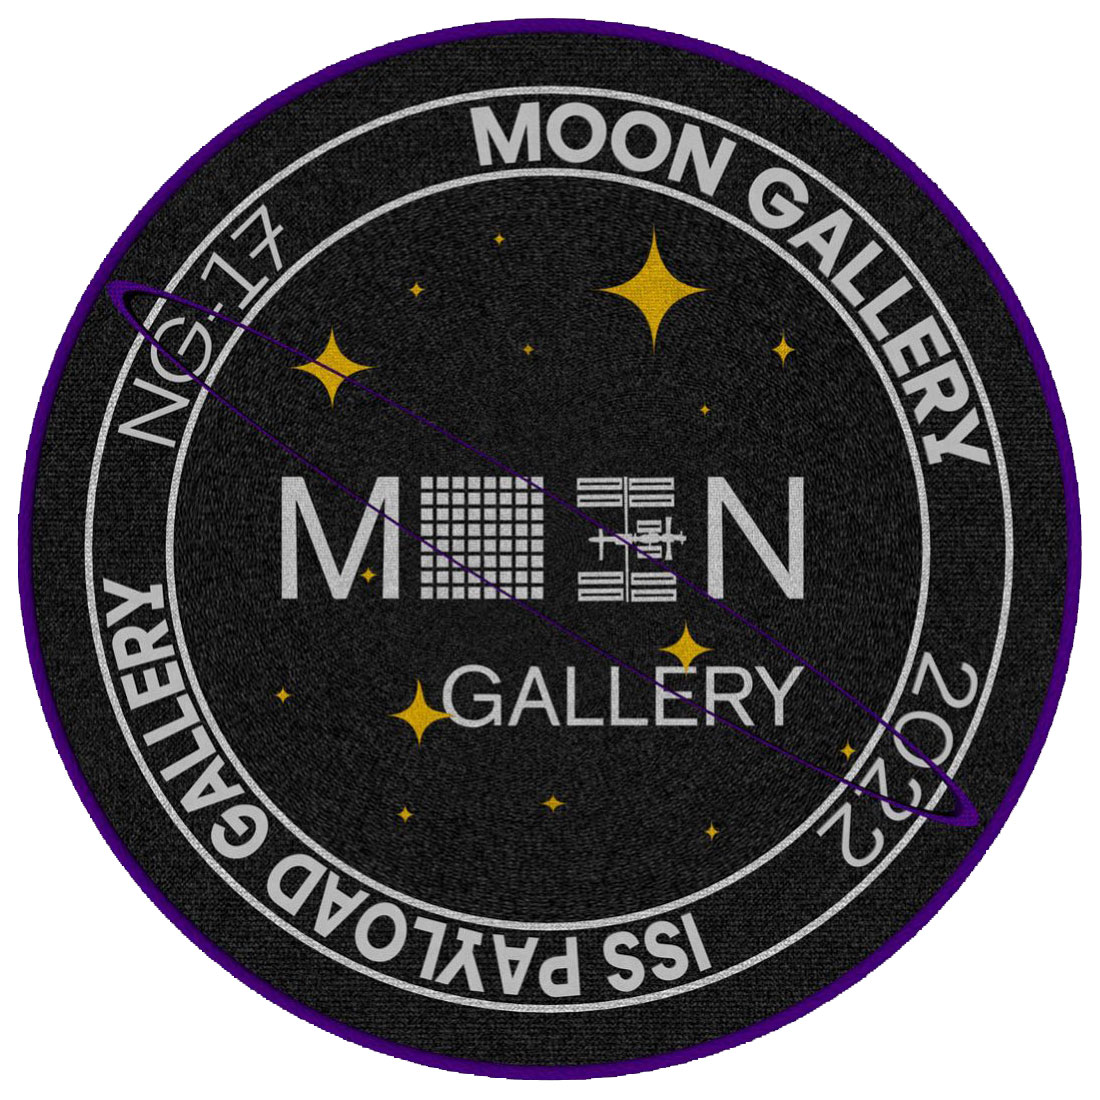 The Moon Gallery ISS payload mission patch.